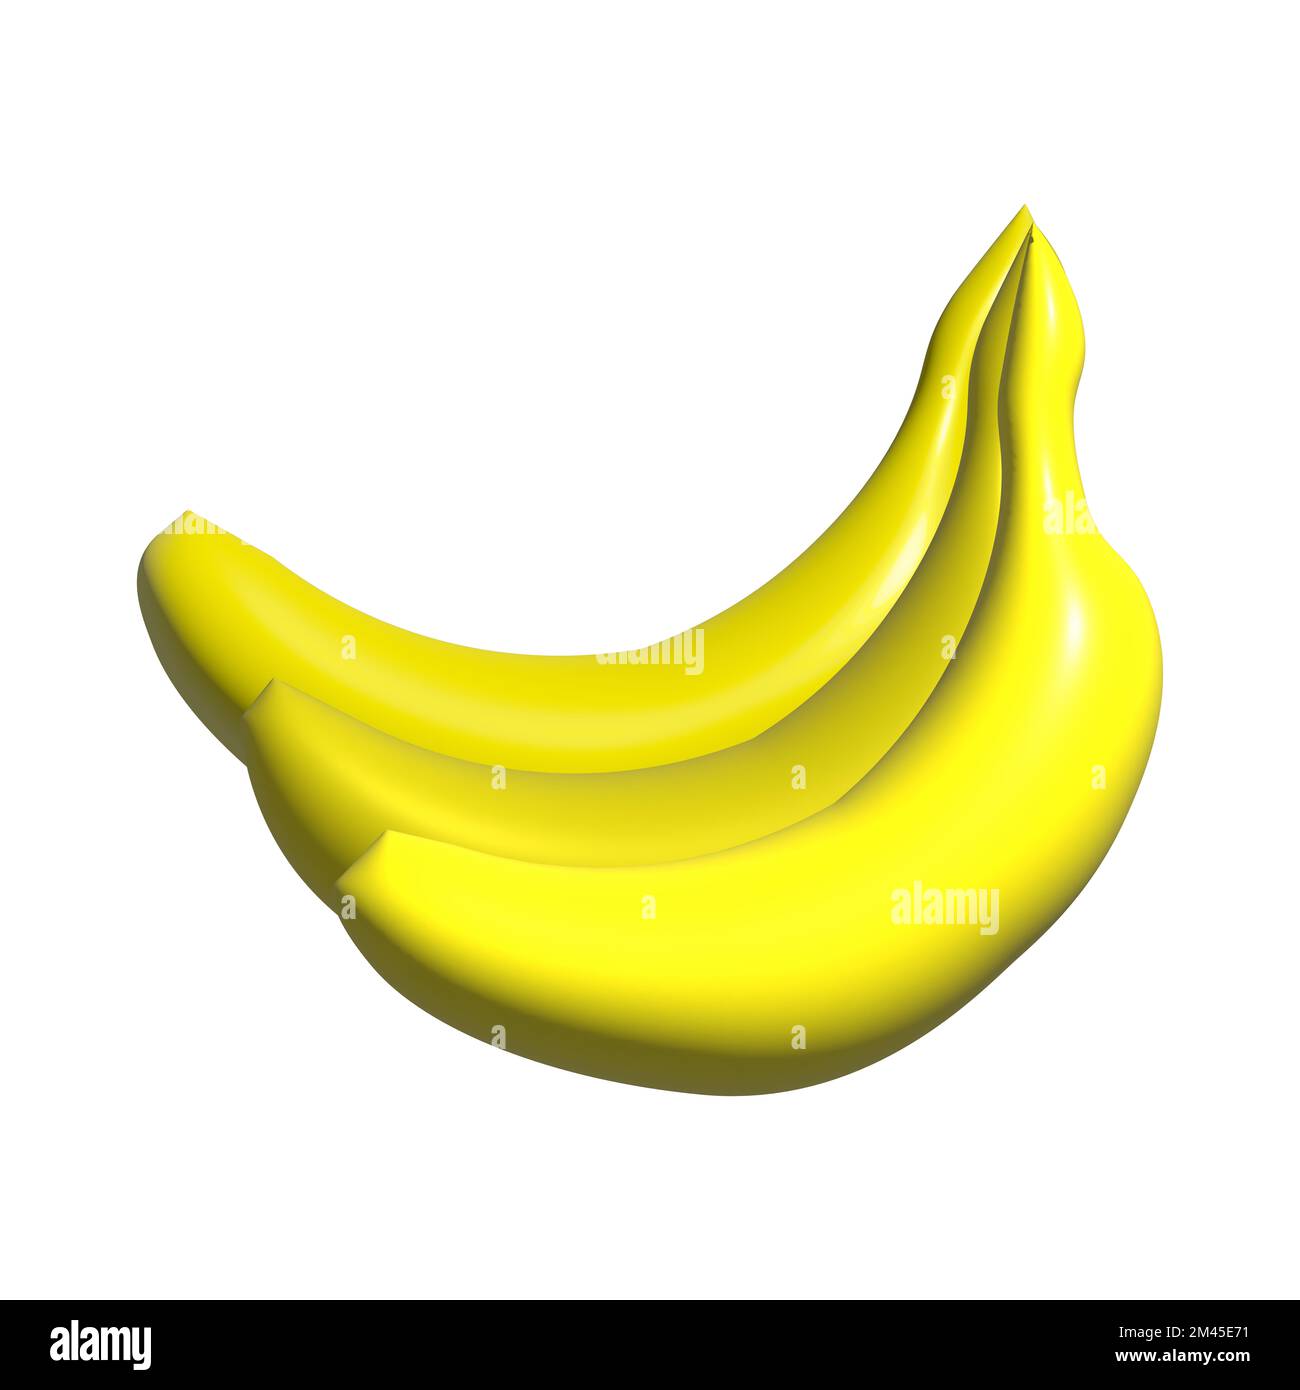 A yellow color banana shaped decoration isolated on a white background Stock Photo